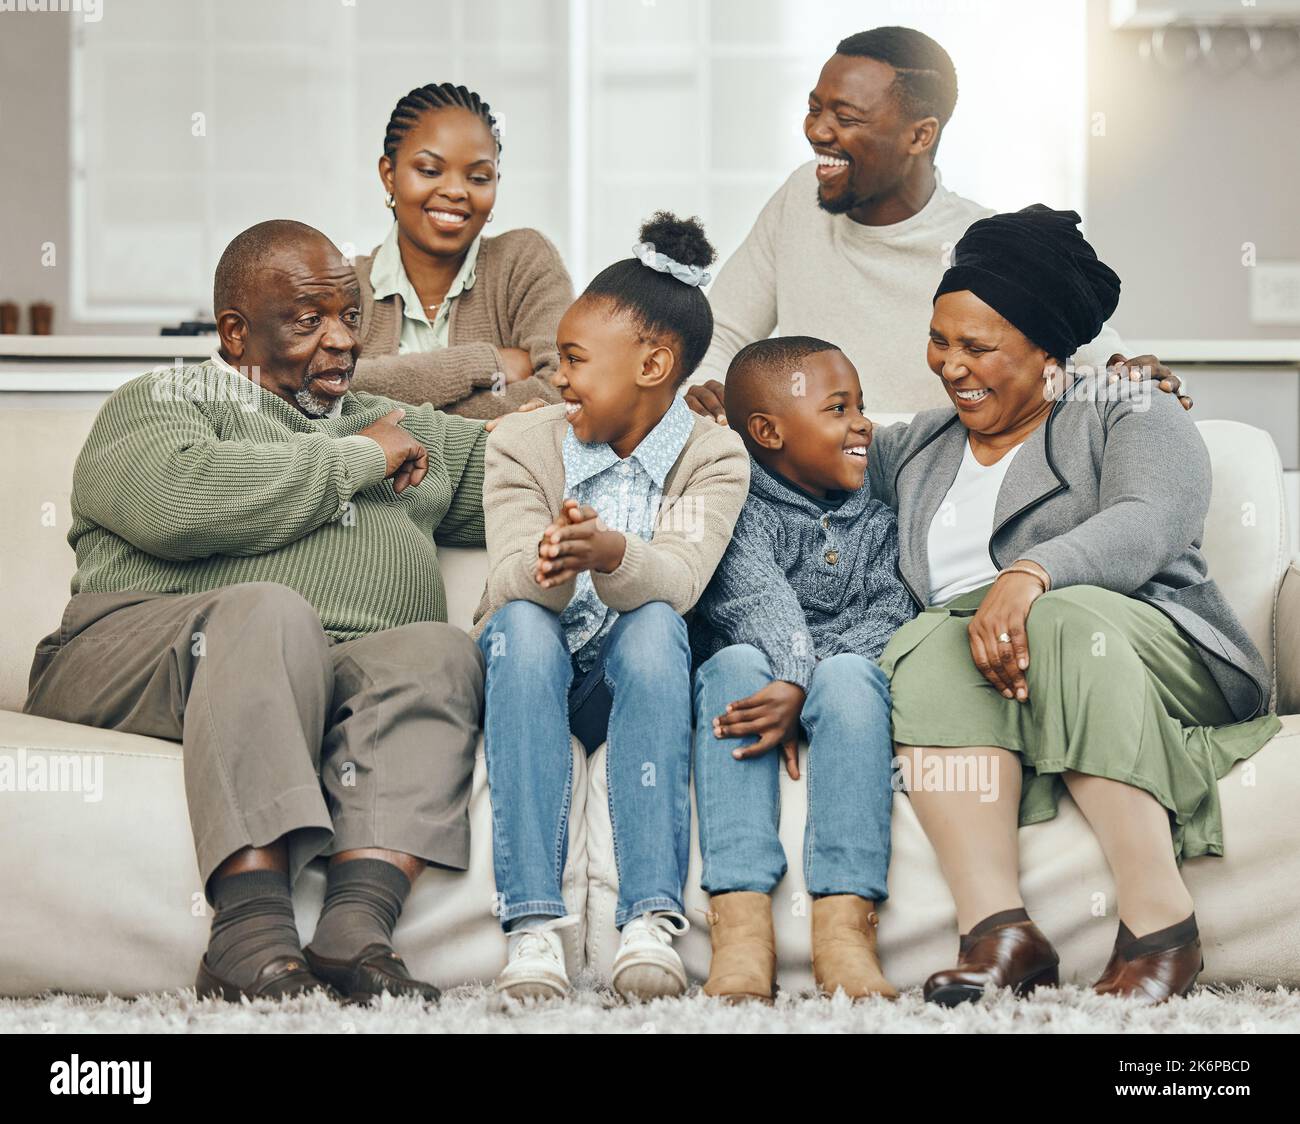 Whose making the tea. a family bonding on a sofa at home. Stock Photo